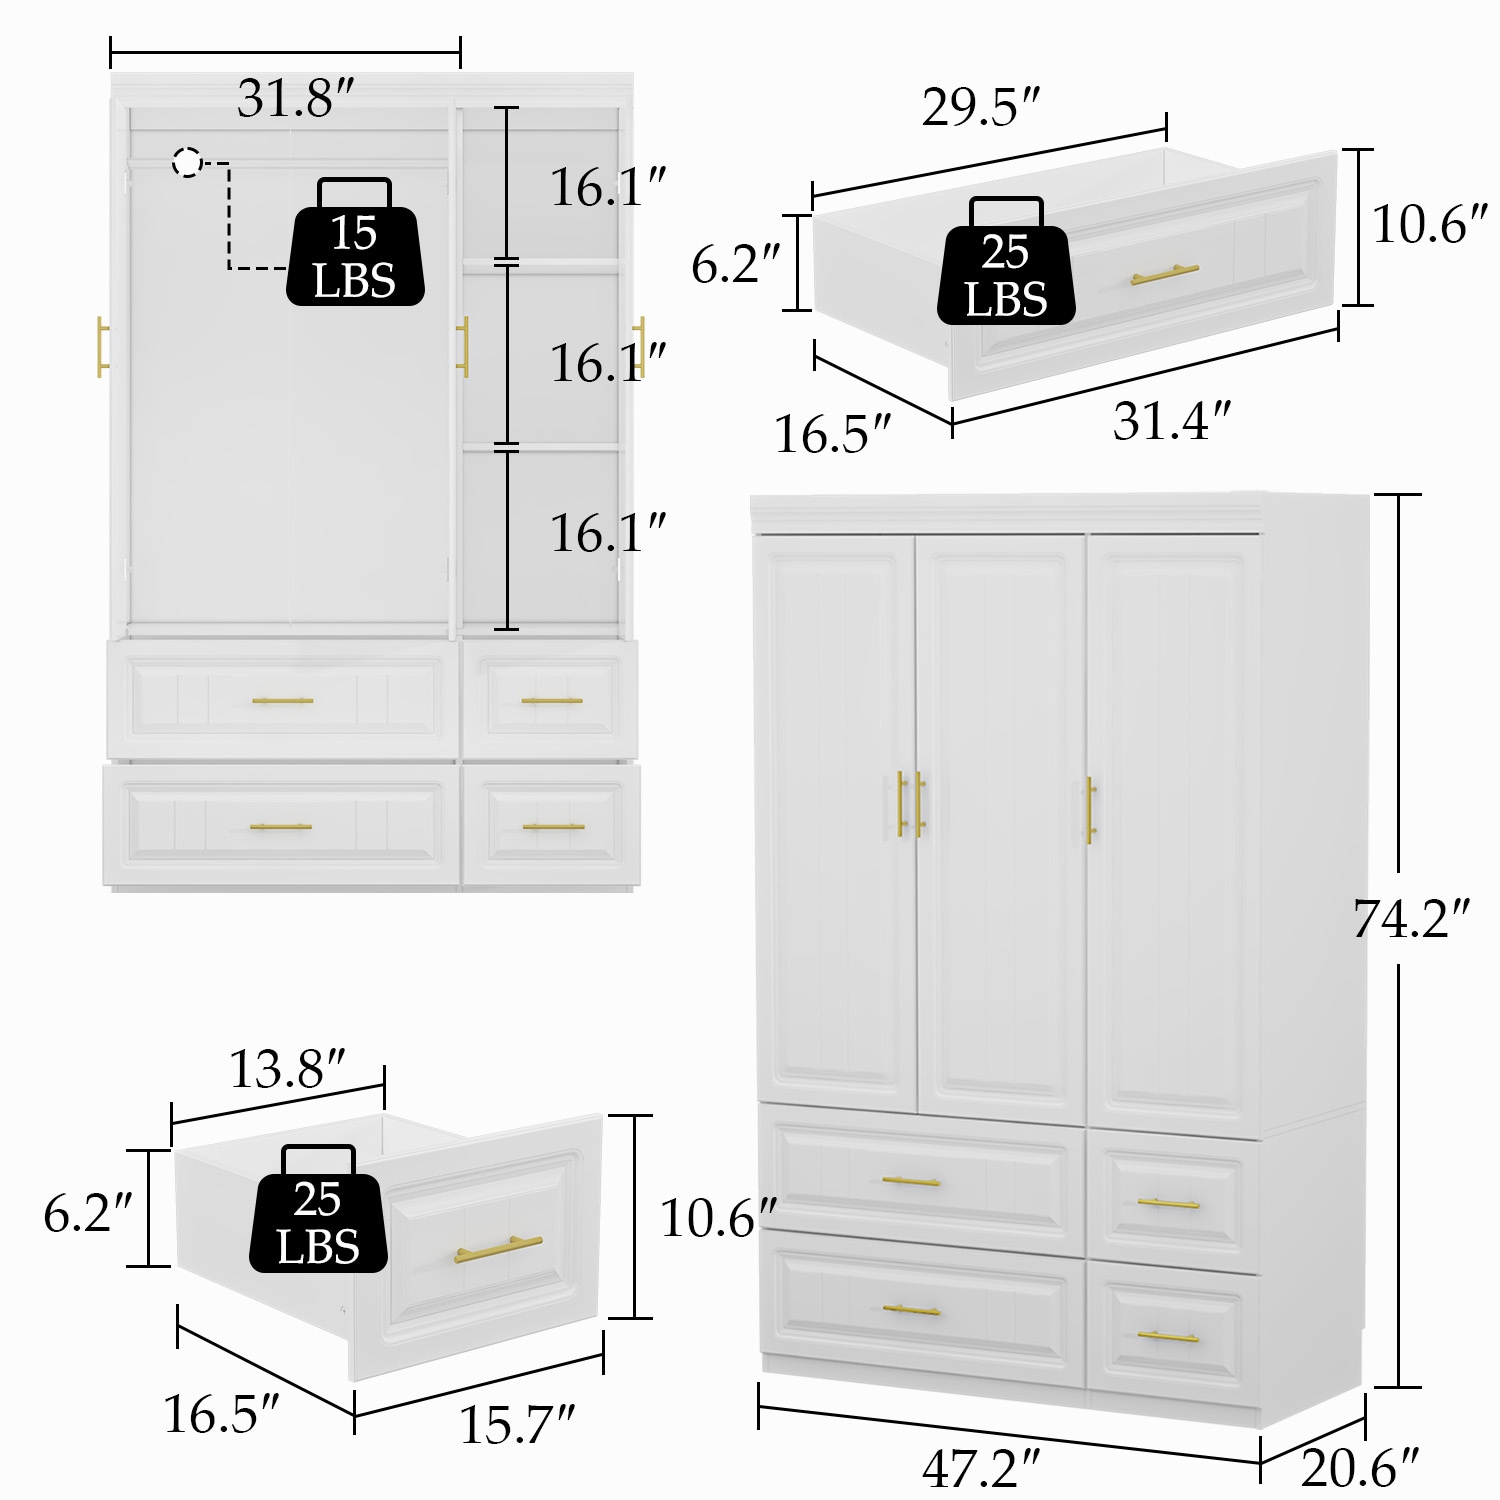 FUFU&GAGA Contemporary 3-Door Wardrobe Closet with in White Multiple 4 Slide the at and department Rails Armoires Spaces Metal - Drawers Finish, Storage